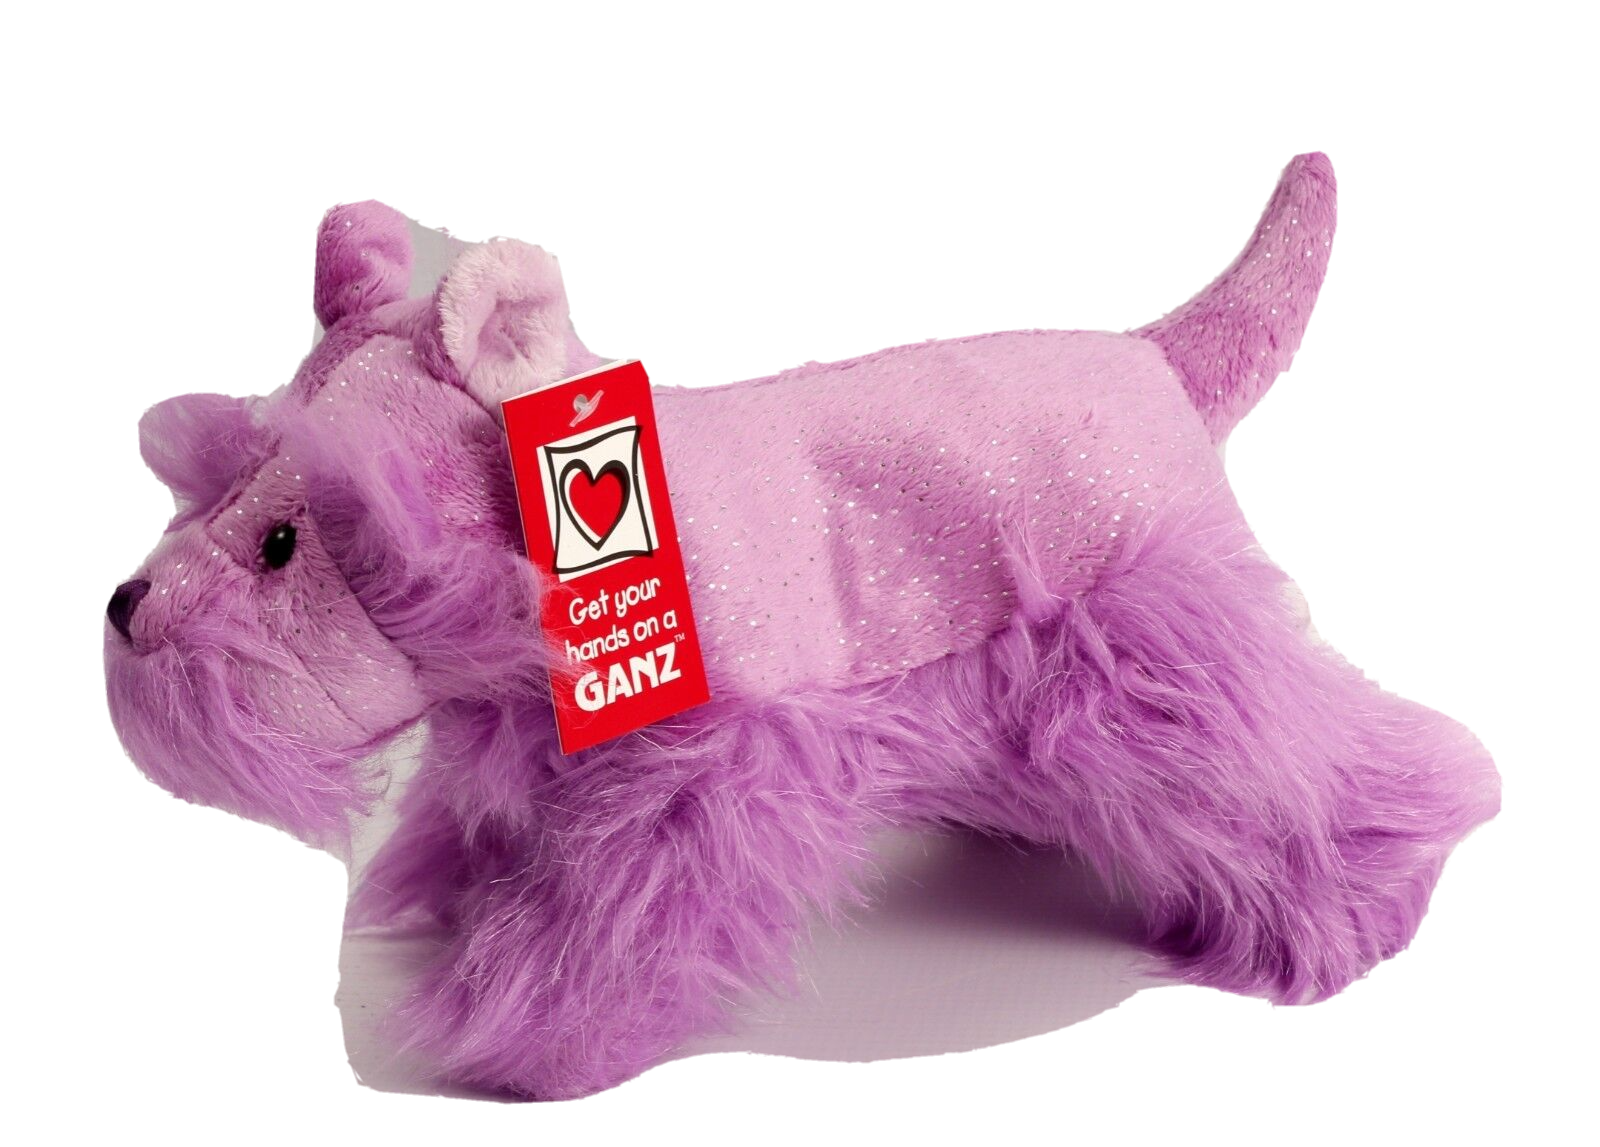 Ganz Scottie Dog 9 Inch Plush Toy Purple Sparkle Color Others are Available New - $12.19